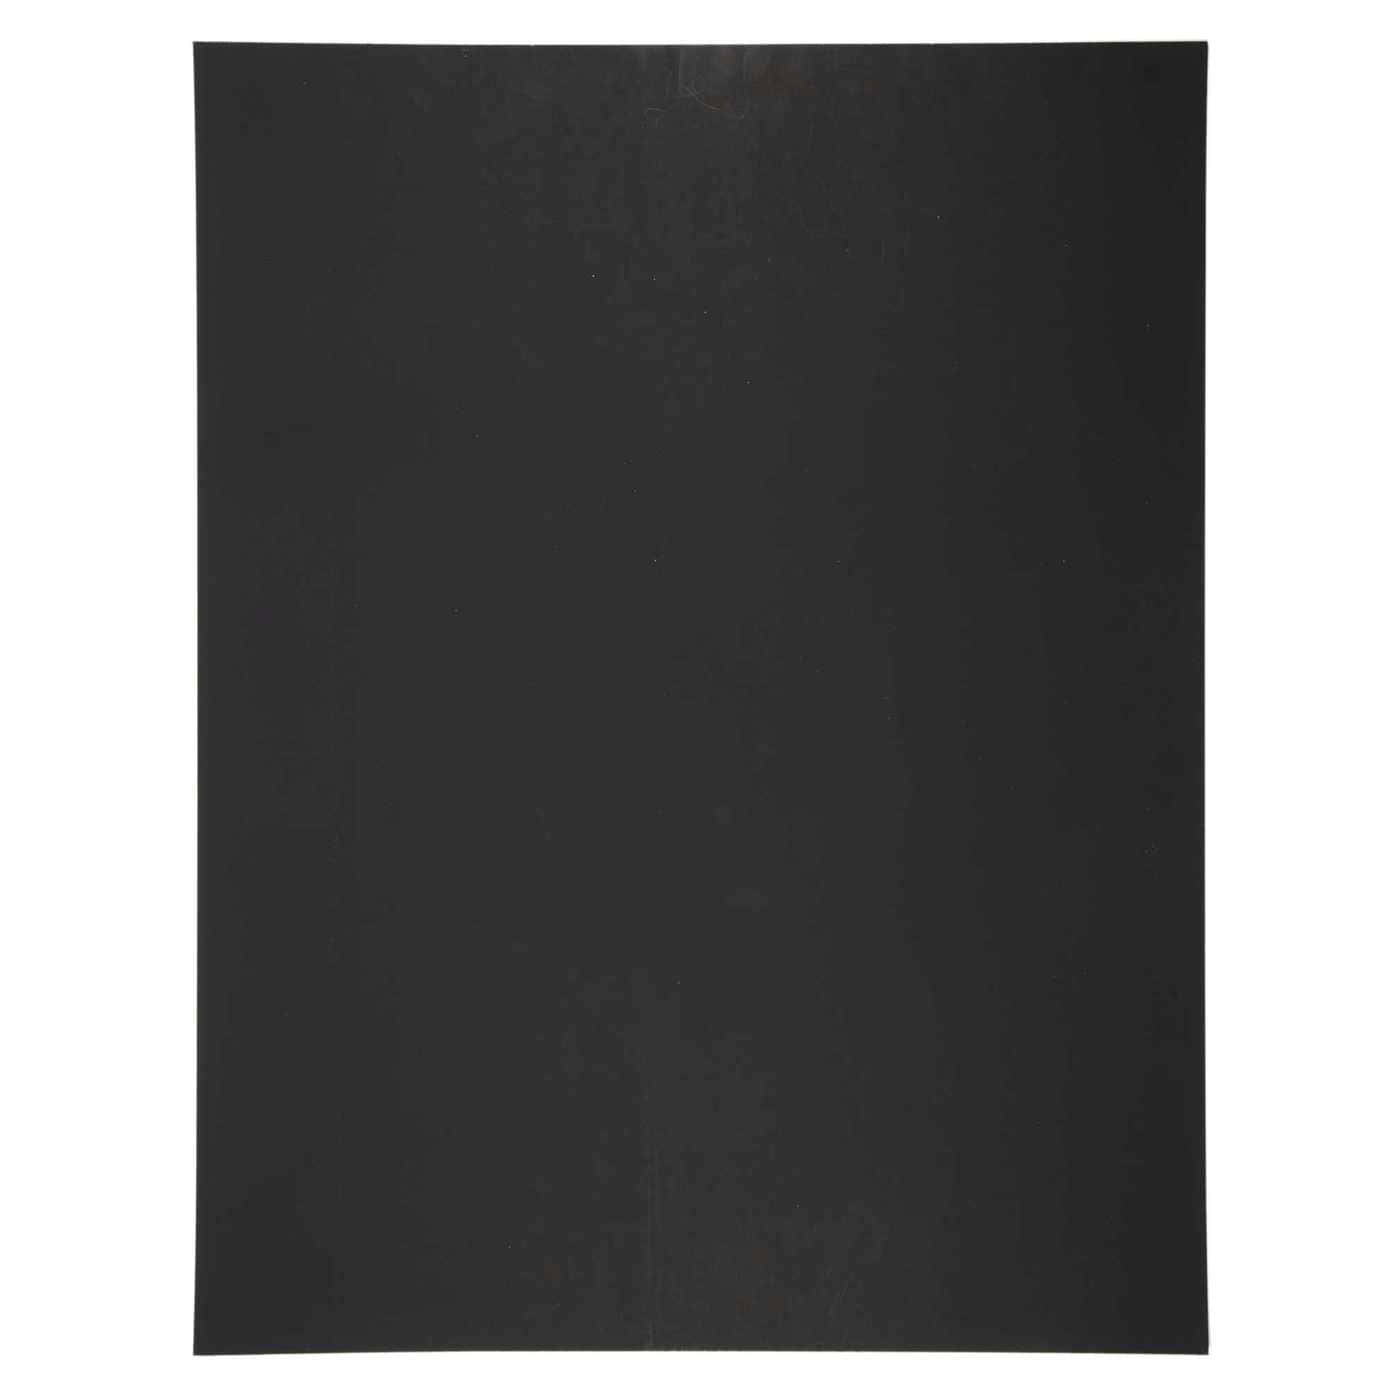 Variety of Colored Poster Boards for Creative Projects